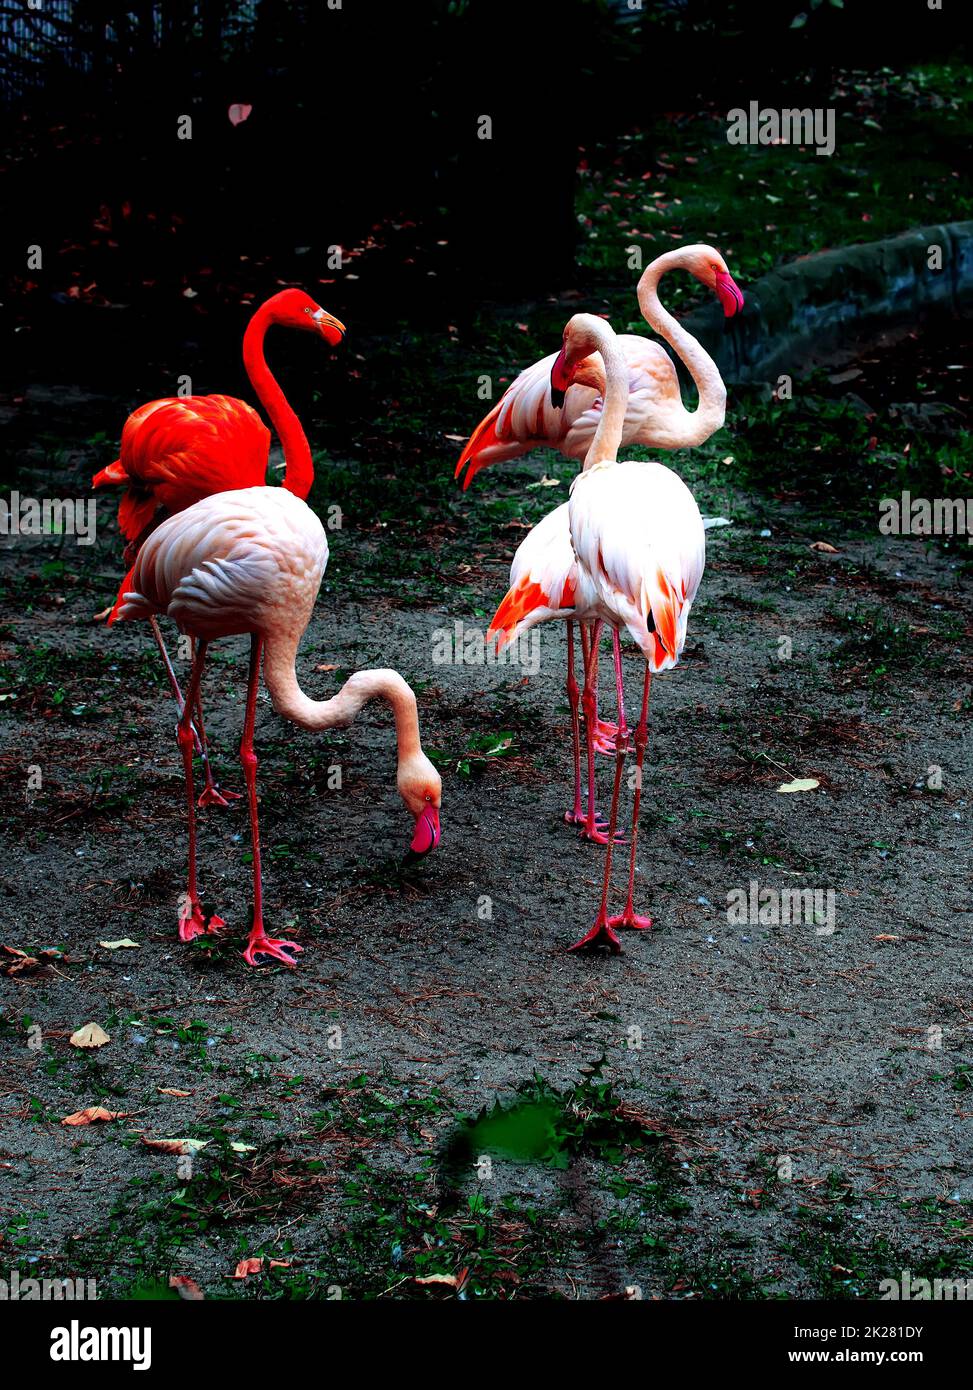 Pink Greater flamingos (Phoenicopterus roseus) and one red American flamingo (Phoenicopterus ruber) standing by the side of the pond. Stock Photo